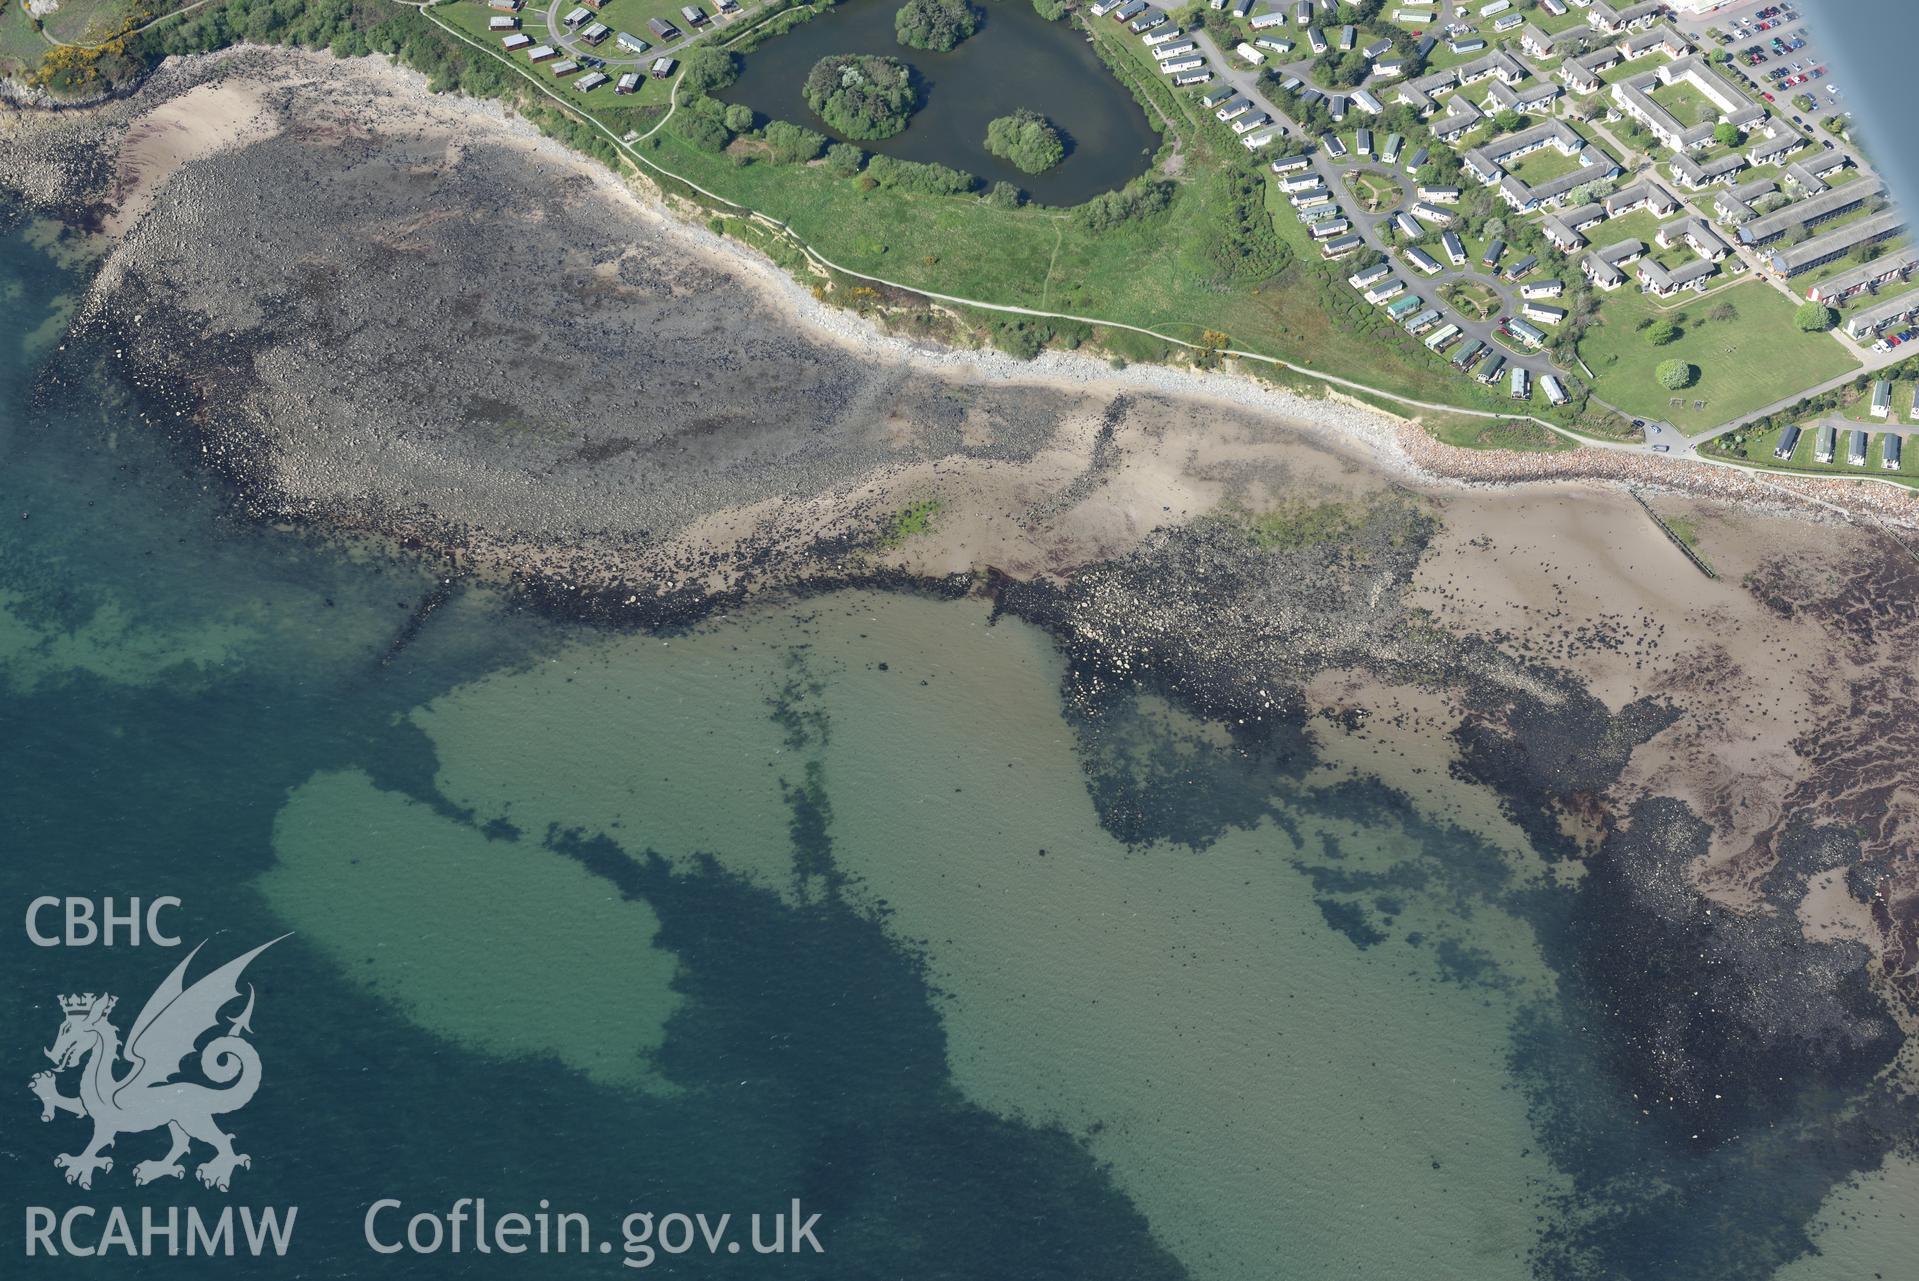 Aerial photography of Cerrif y Barcdy taken on 3rd May 2017.  Baseline aerial reconnaissance survey for the CHERISH Project. ? Crown: CHERISH PROJECT 2017. Produced with EU funds through the Ireland Wales Co-operation Programme 2014-2020. All material made freely available through the Open Government Licence.